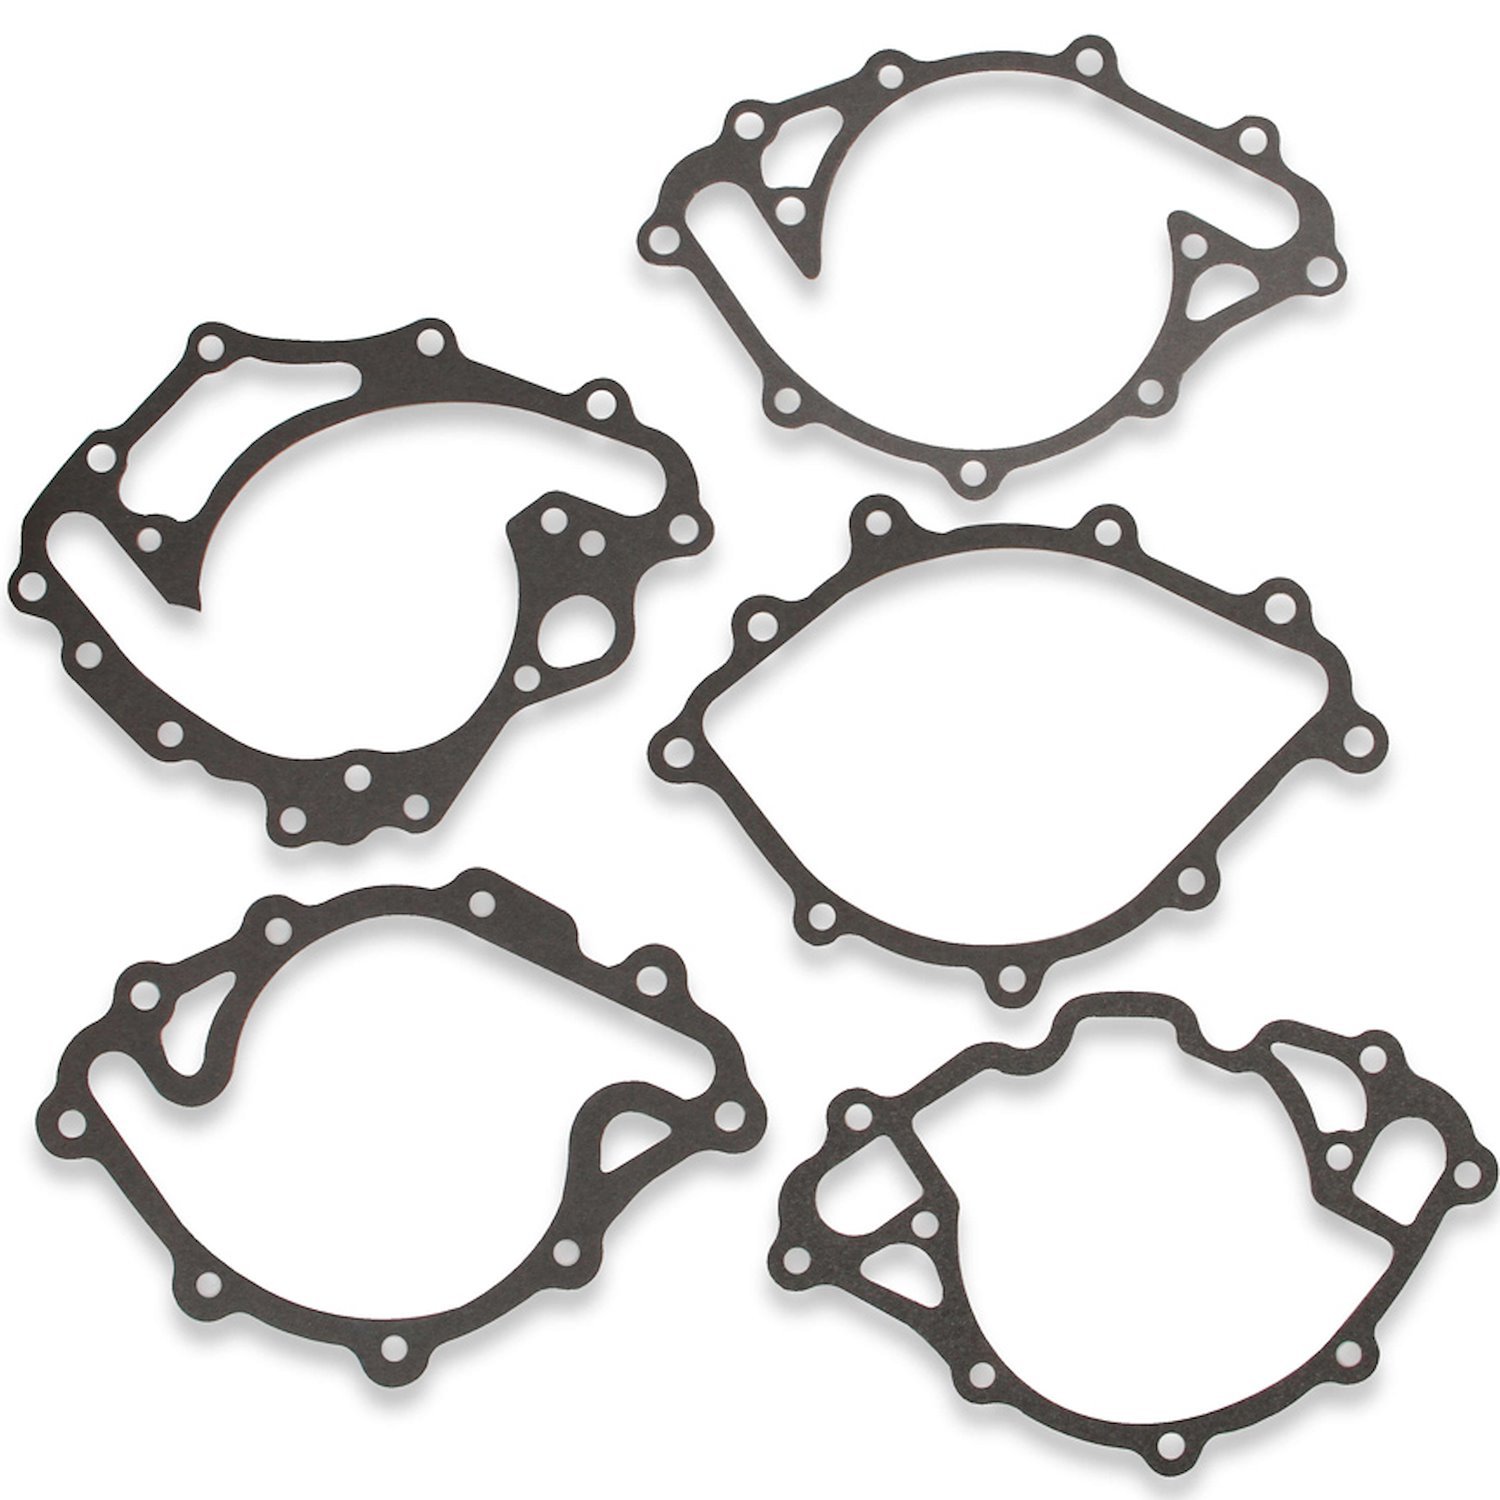 Water Pump Gaskets for 1962-1976 Small Block Ford 289, 302 ci